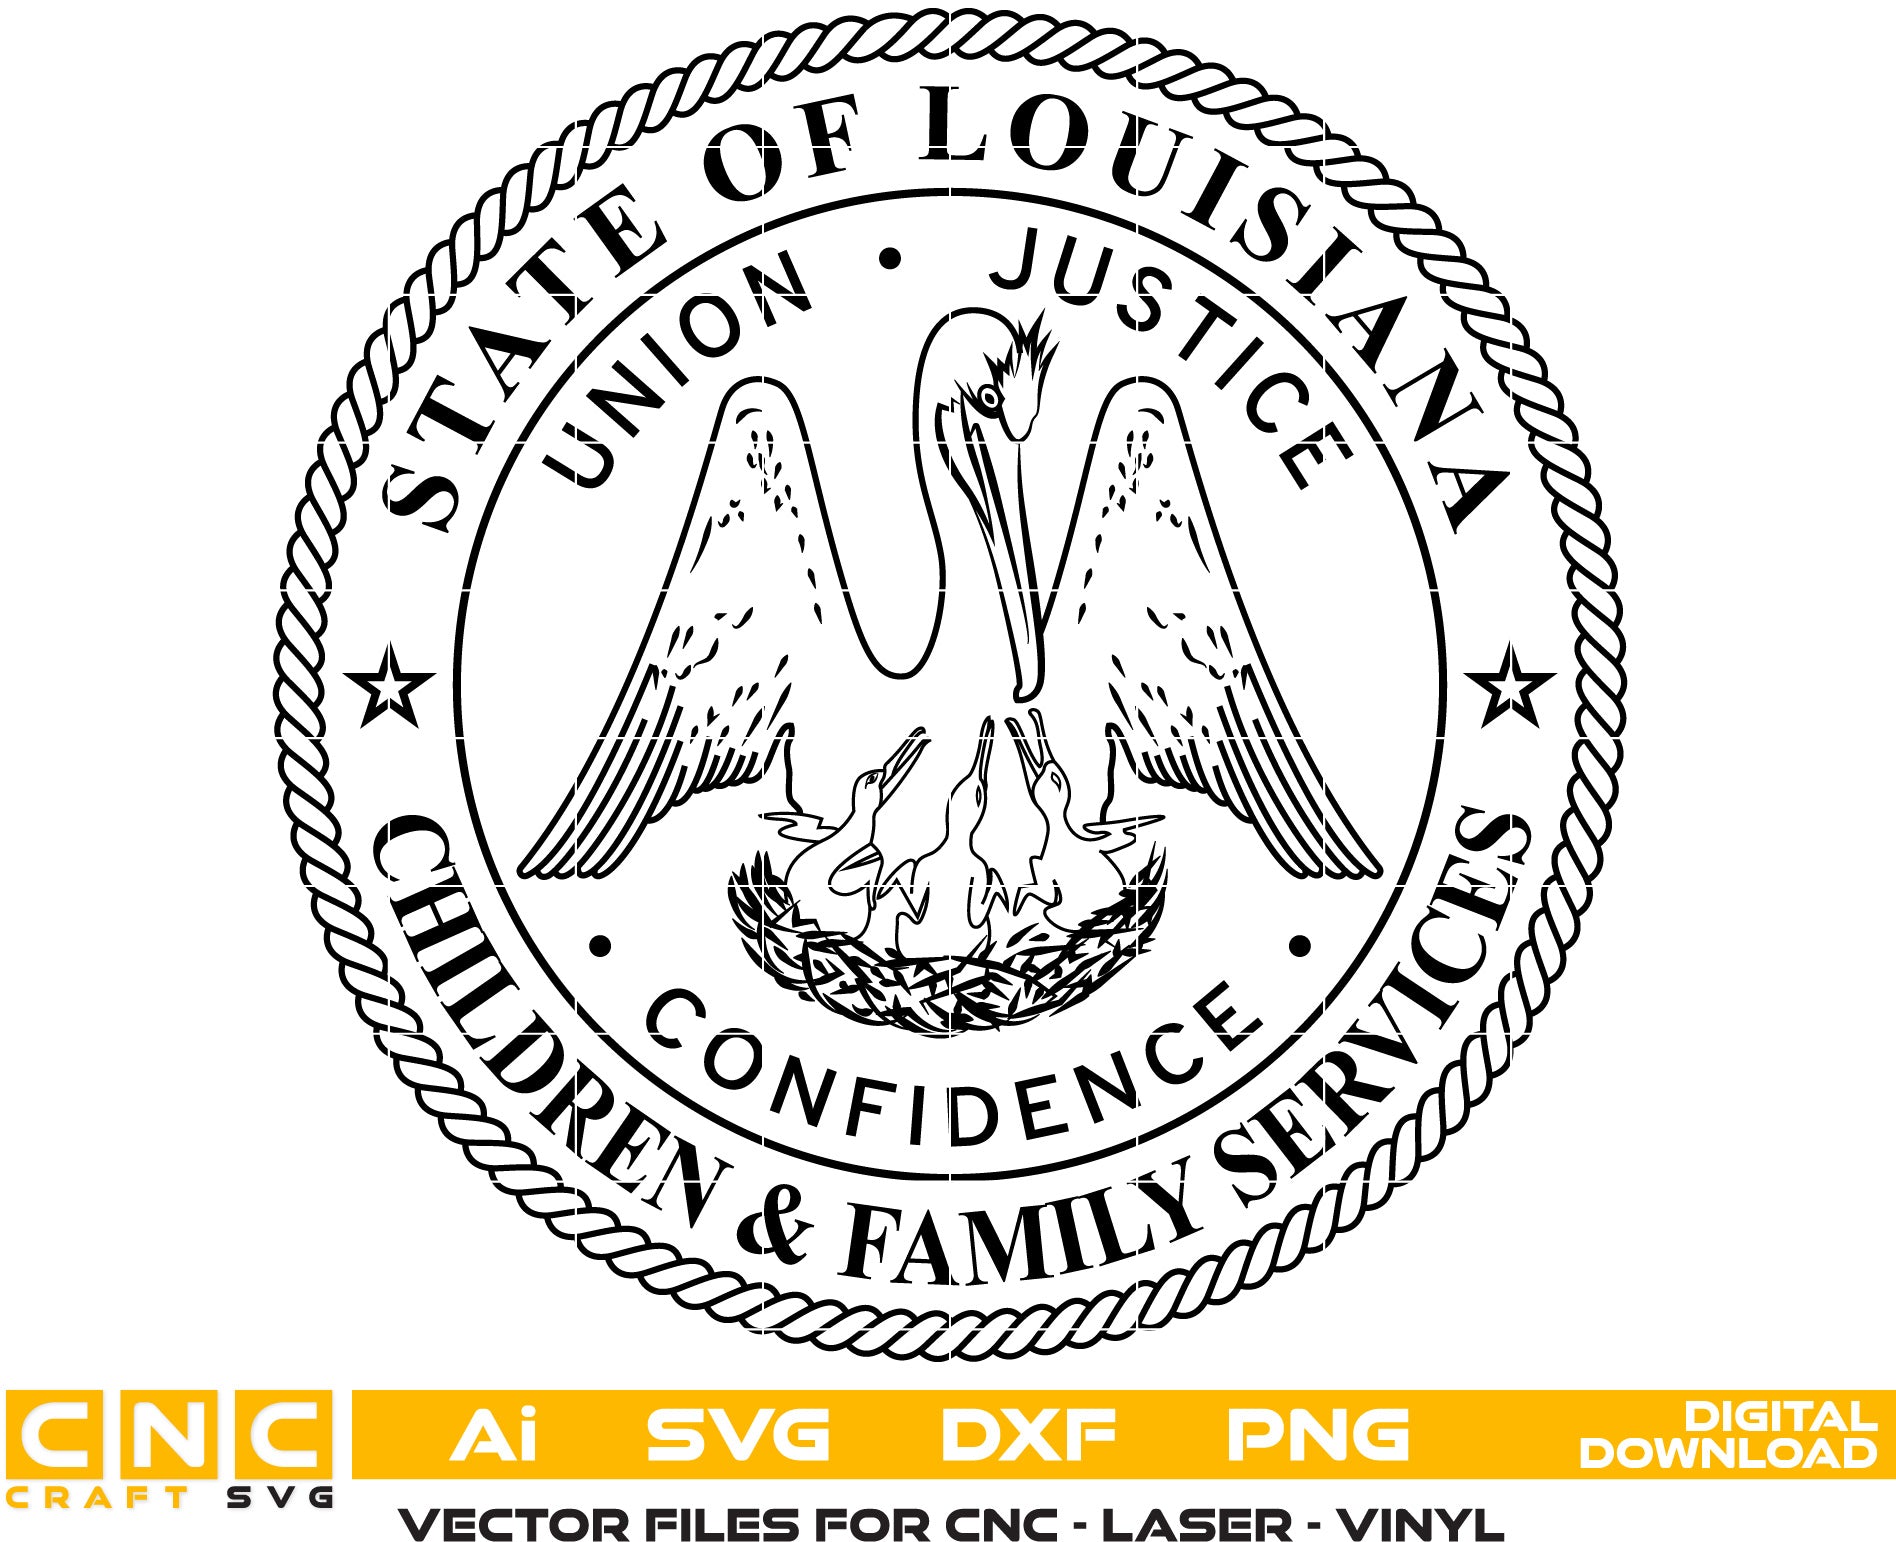 Children & Family Services Tha Great Seal of the State of Louisiana Logo Vector Art, Ai,SVG, DXF, PNG, Digital Files for Laser Engraving, Woodworking & Printing